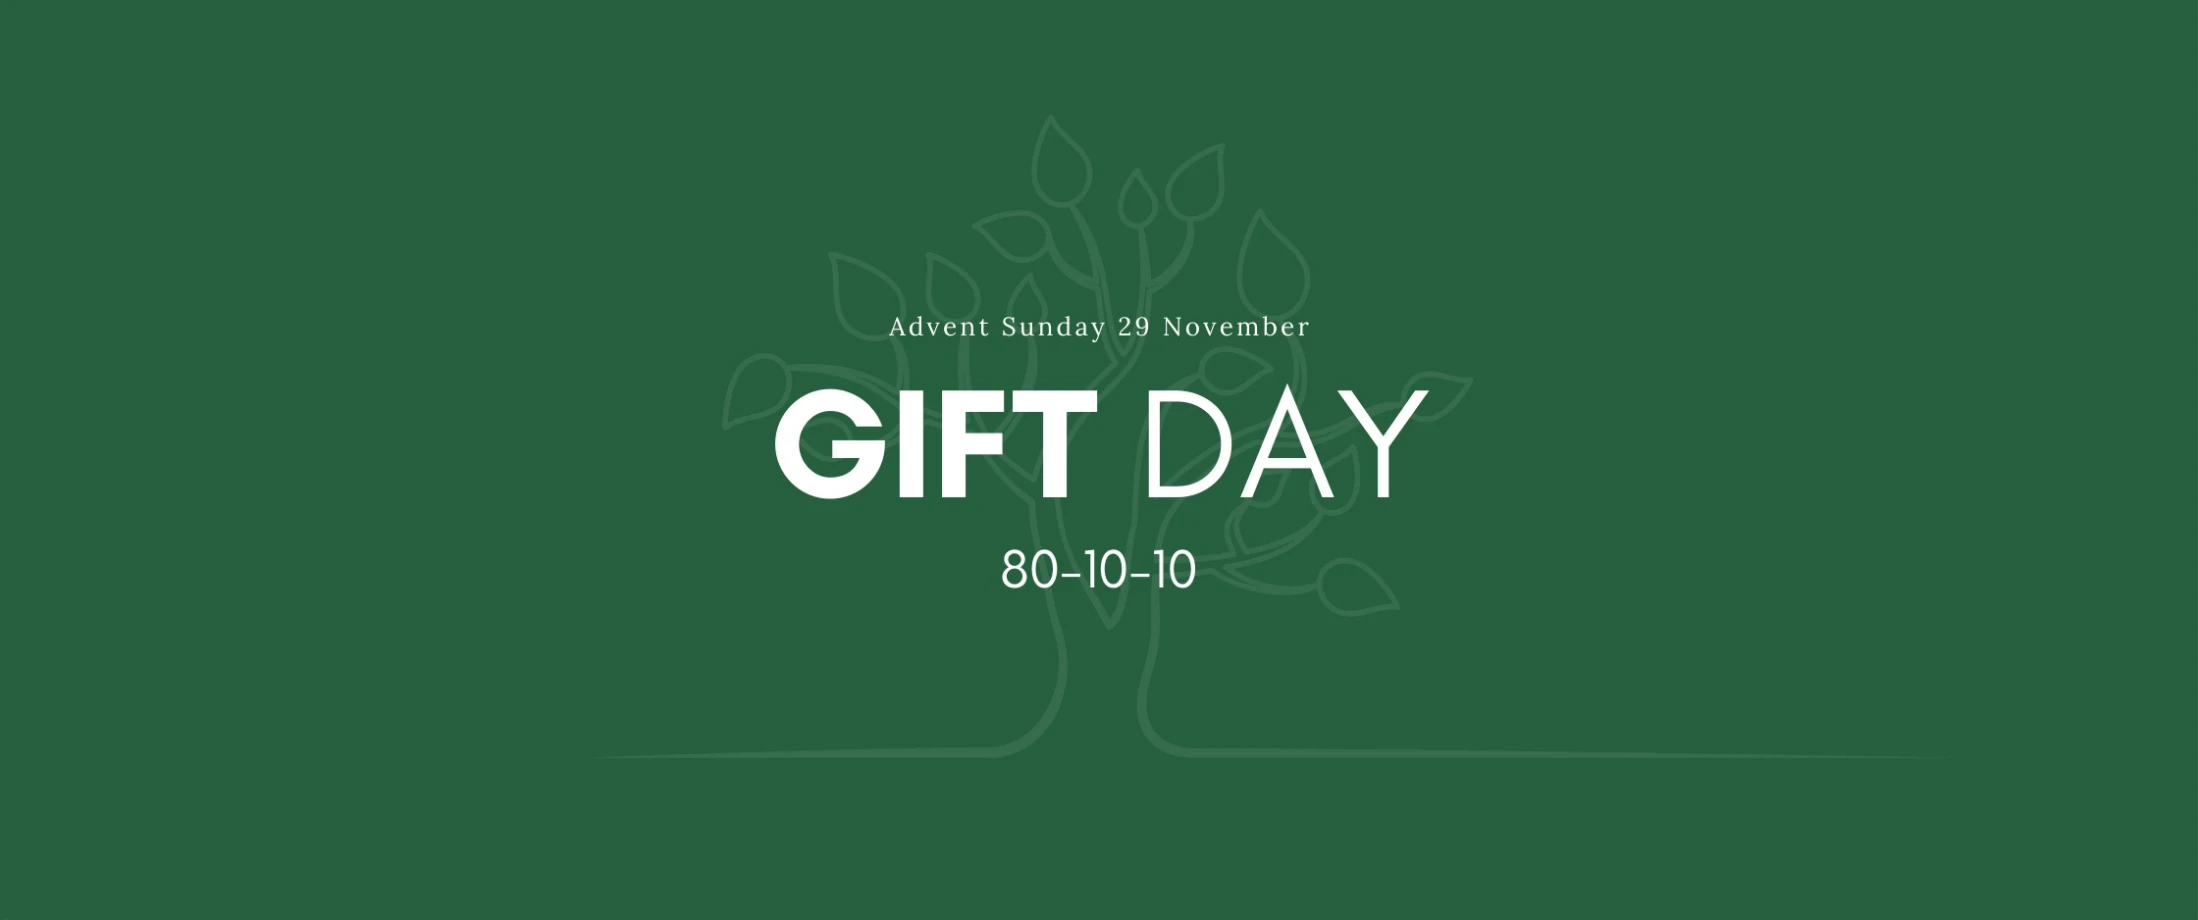 Advent Gift Day